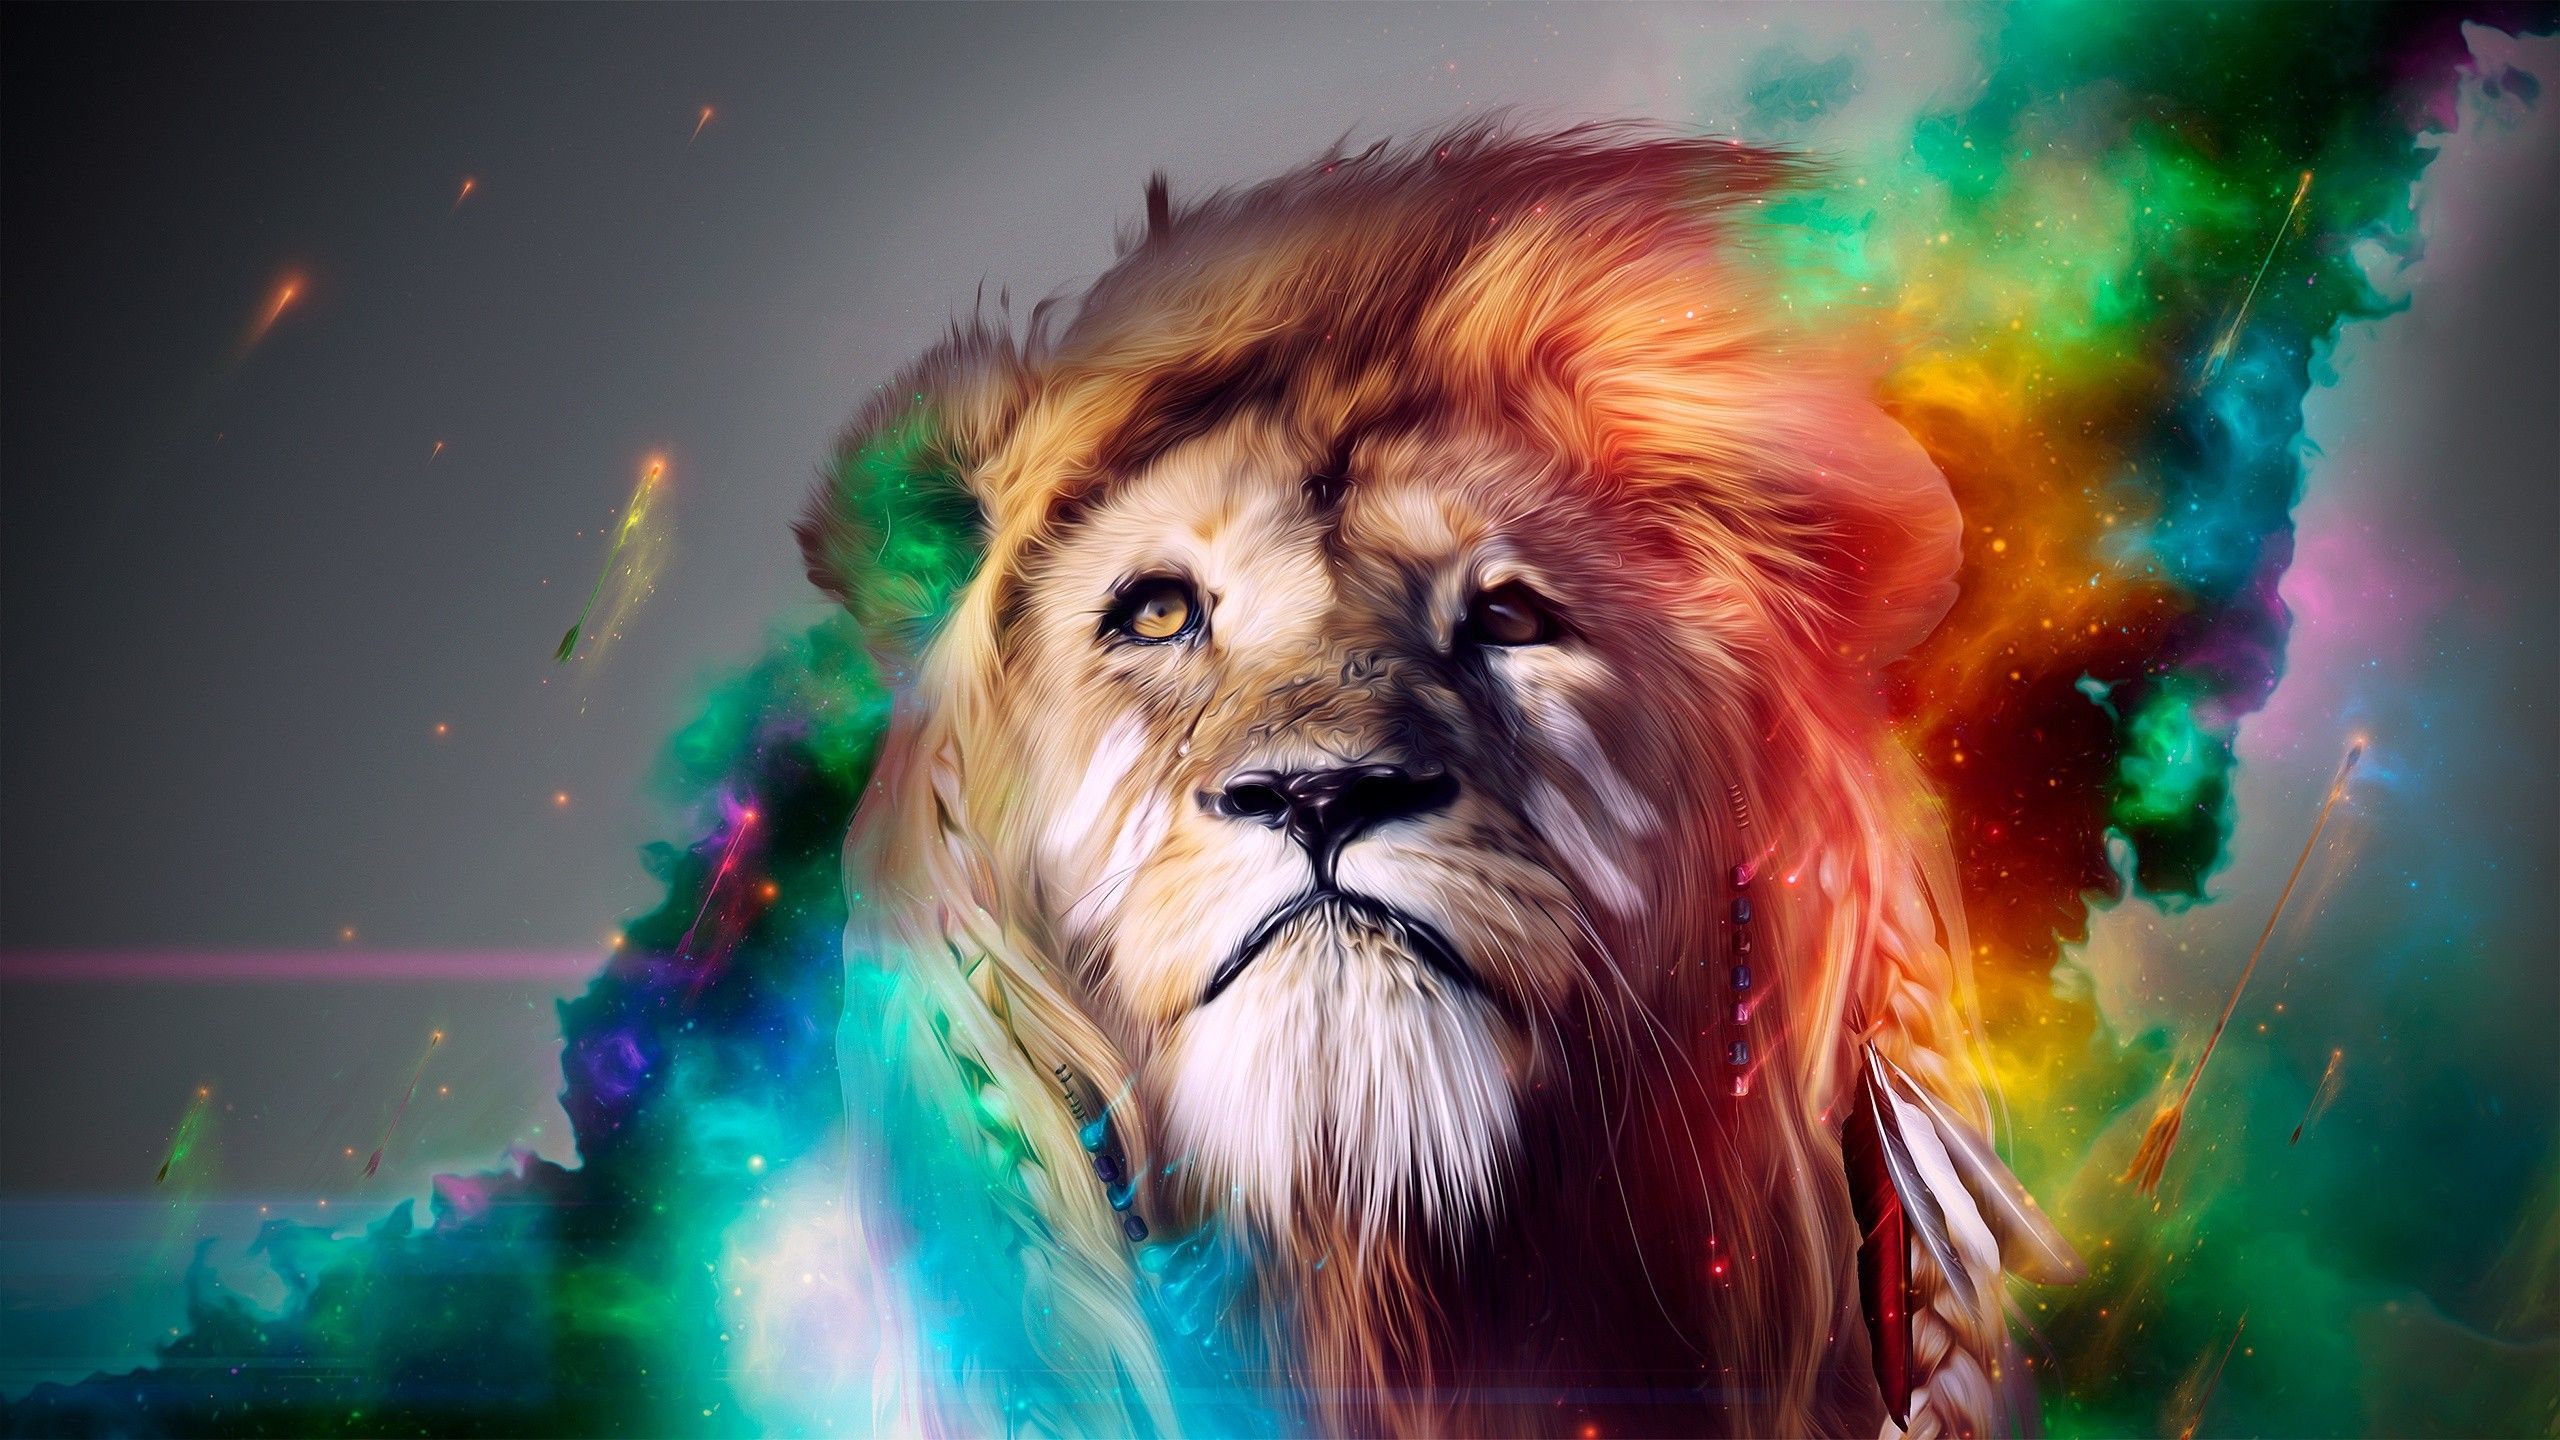 807 Lion HD Wallpapers Backgrounds - Wallpaper Abyss